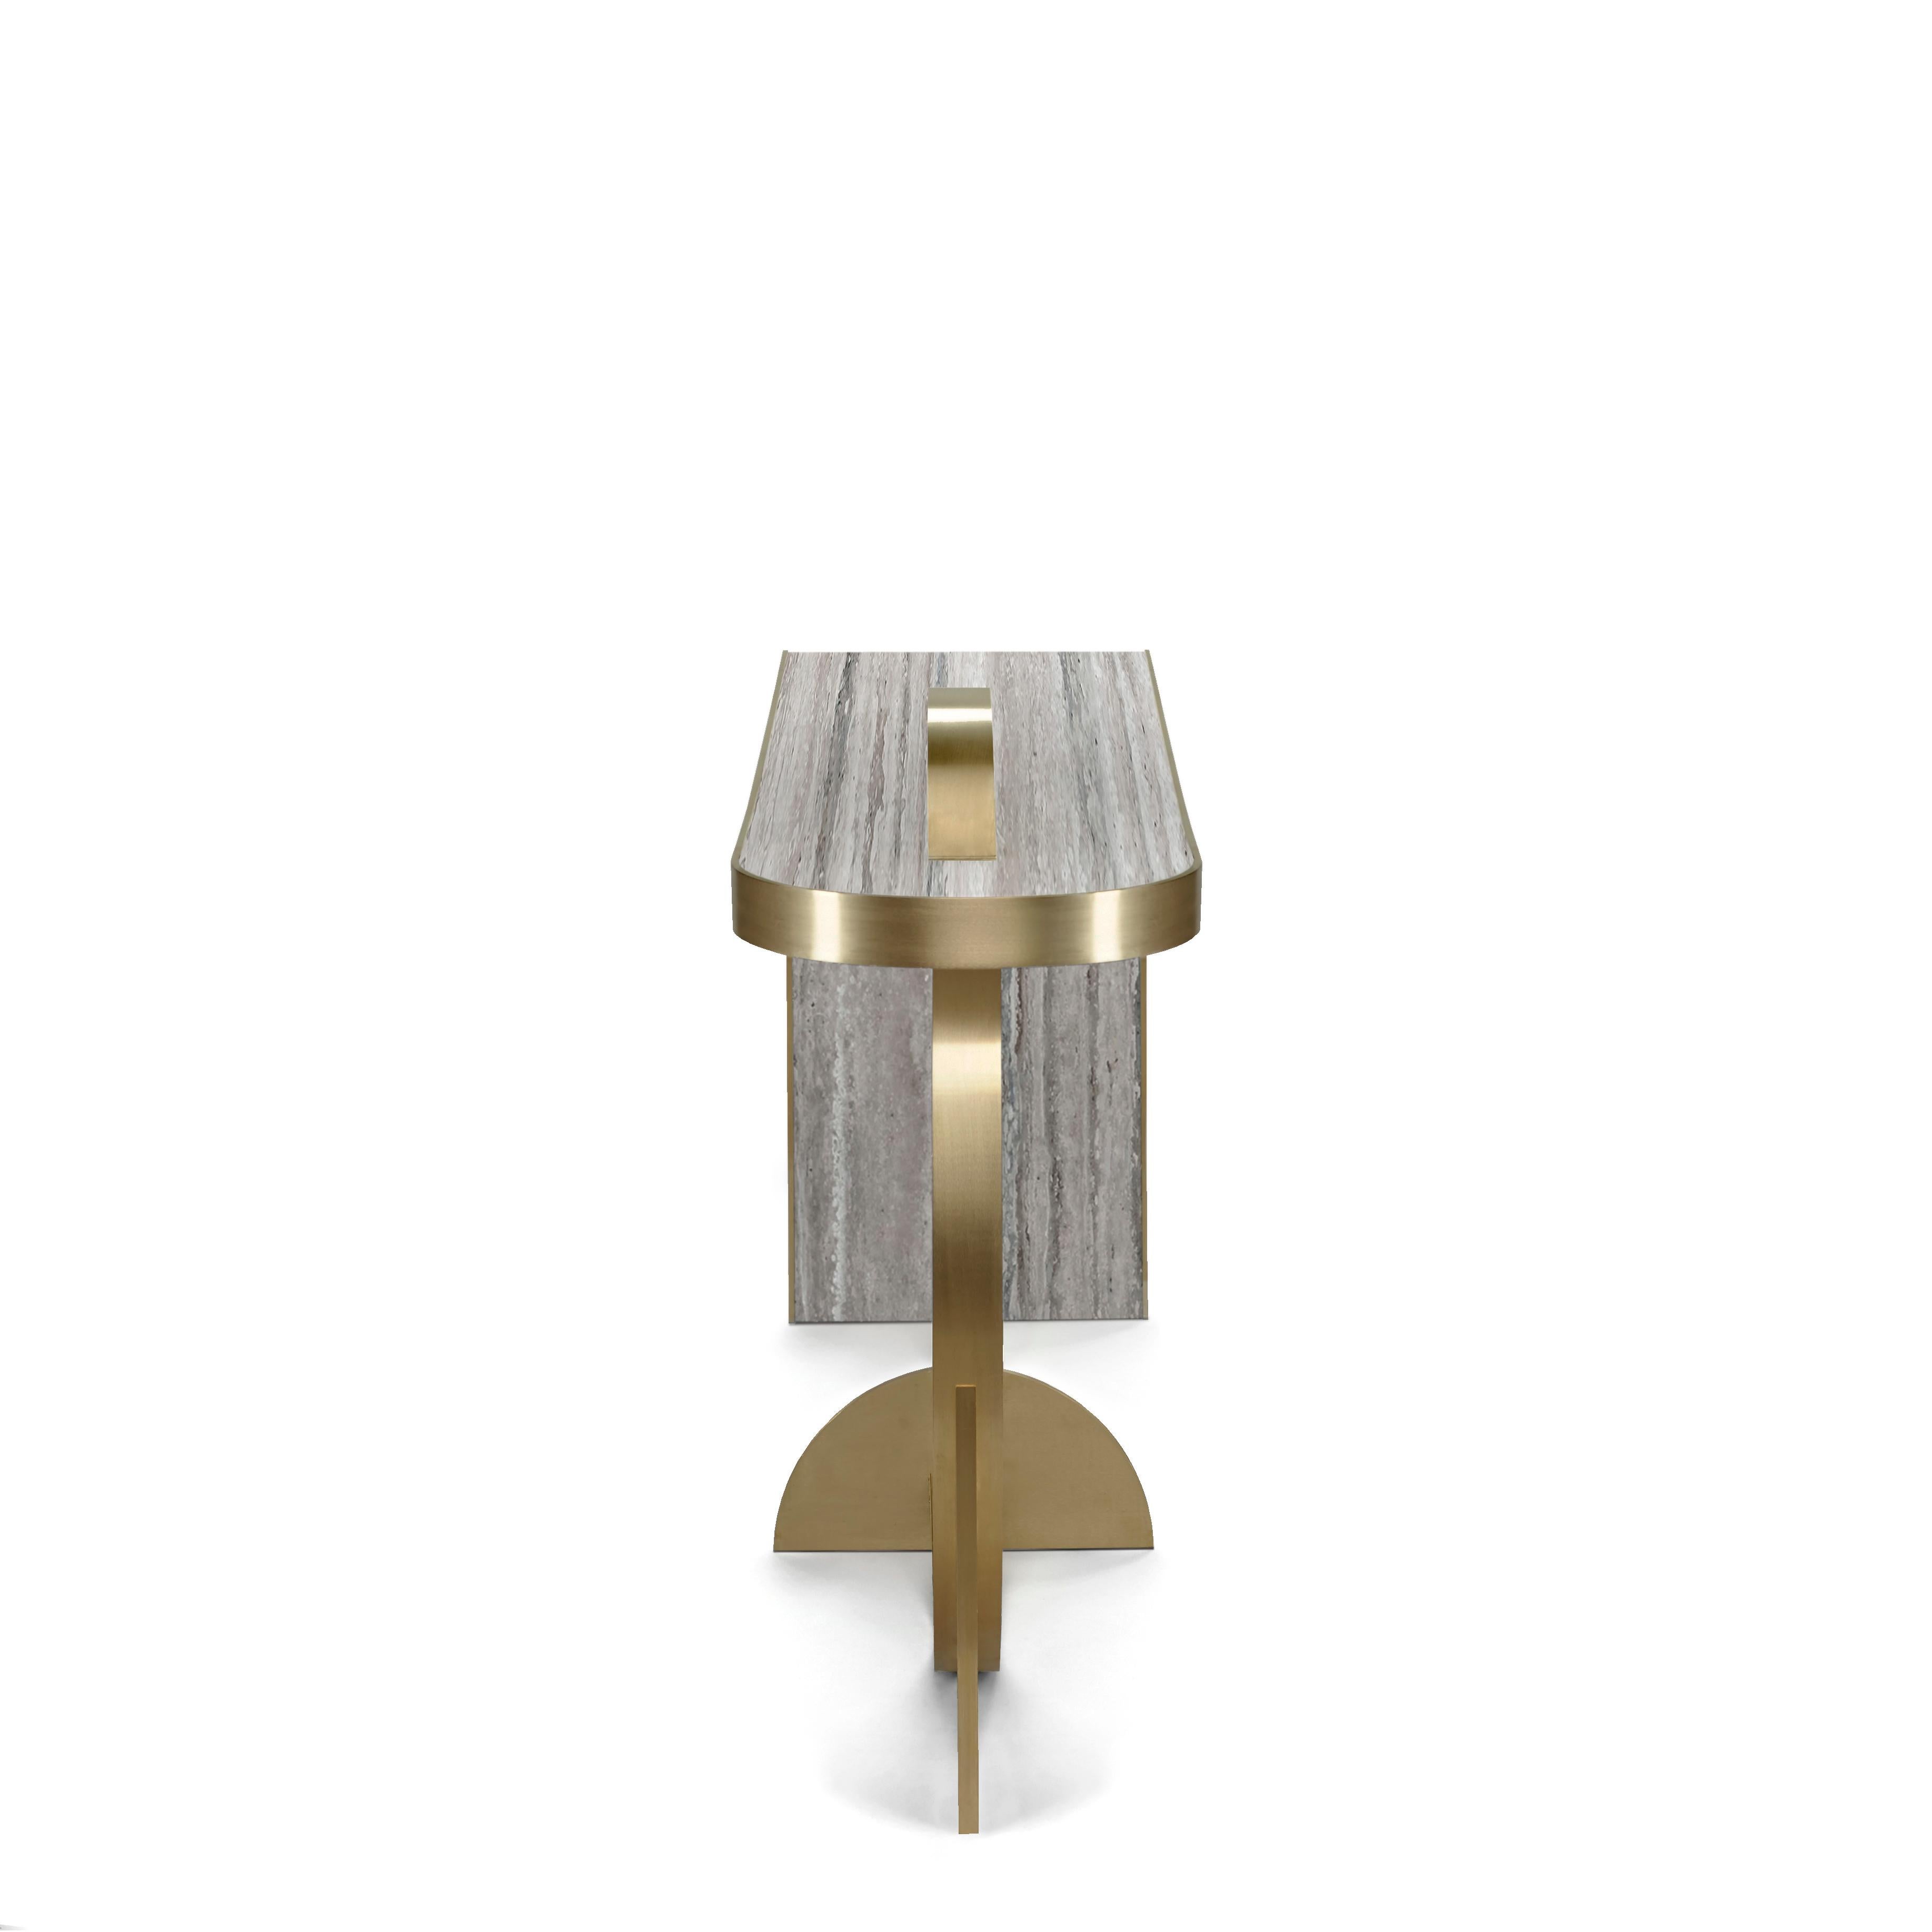 Modern The Collision Console Travertine Marble Brushed Brass Geometric by Lara Bohinc For Sale